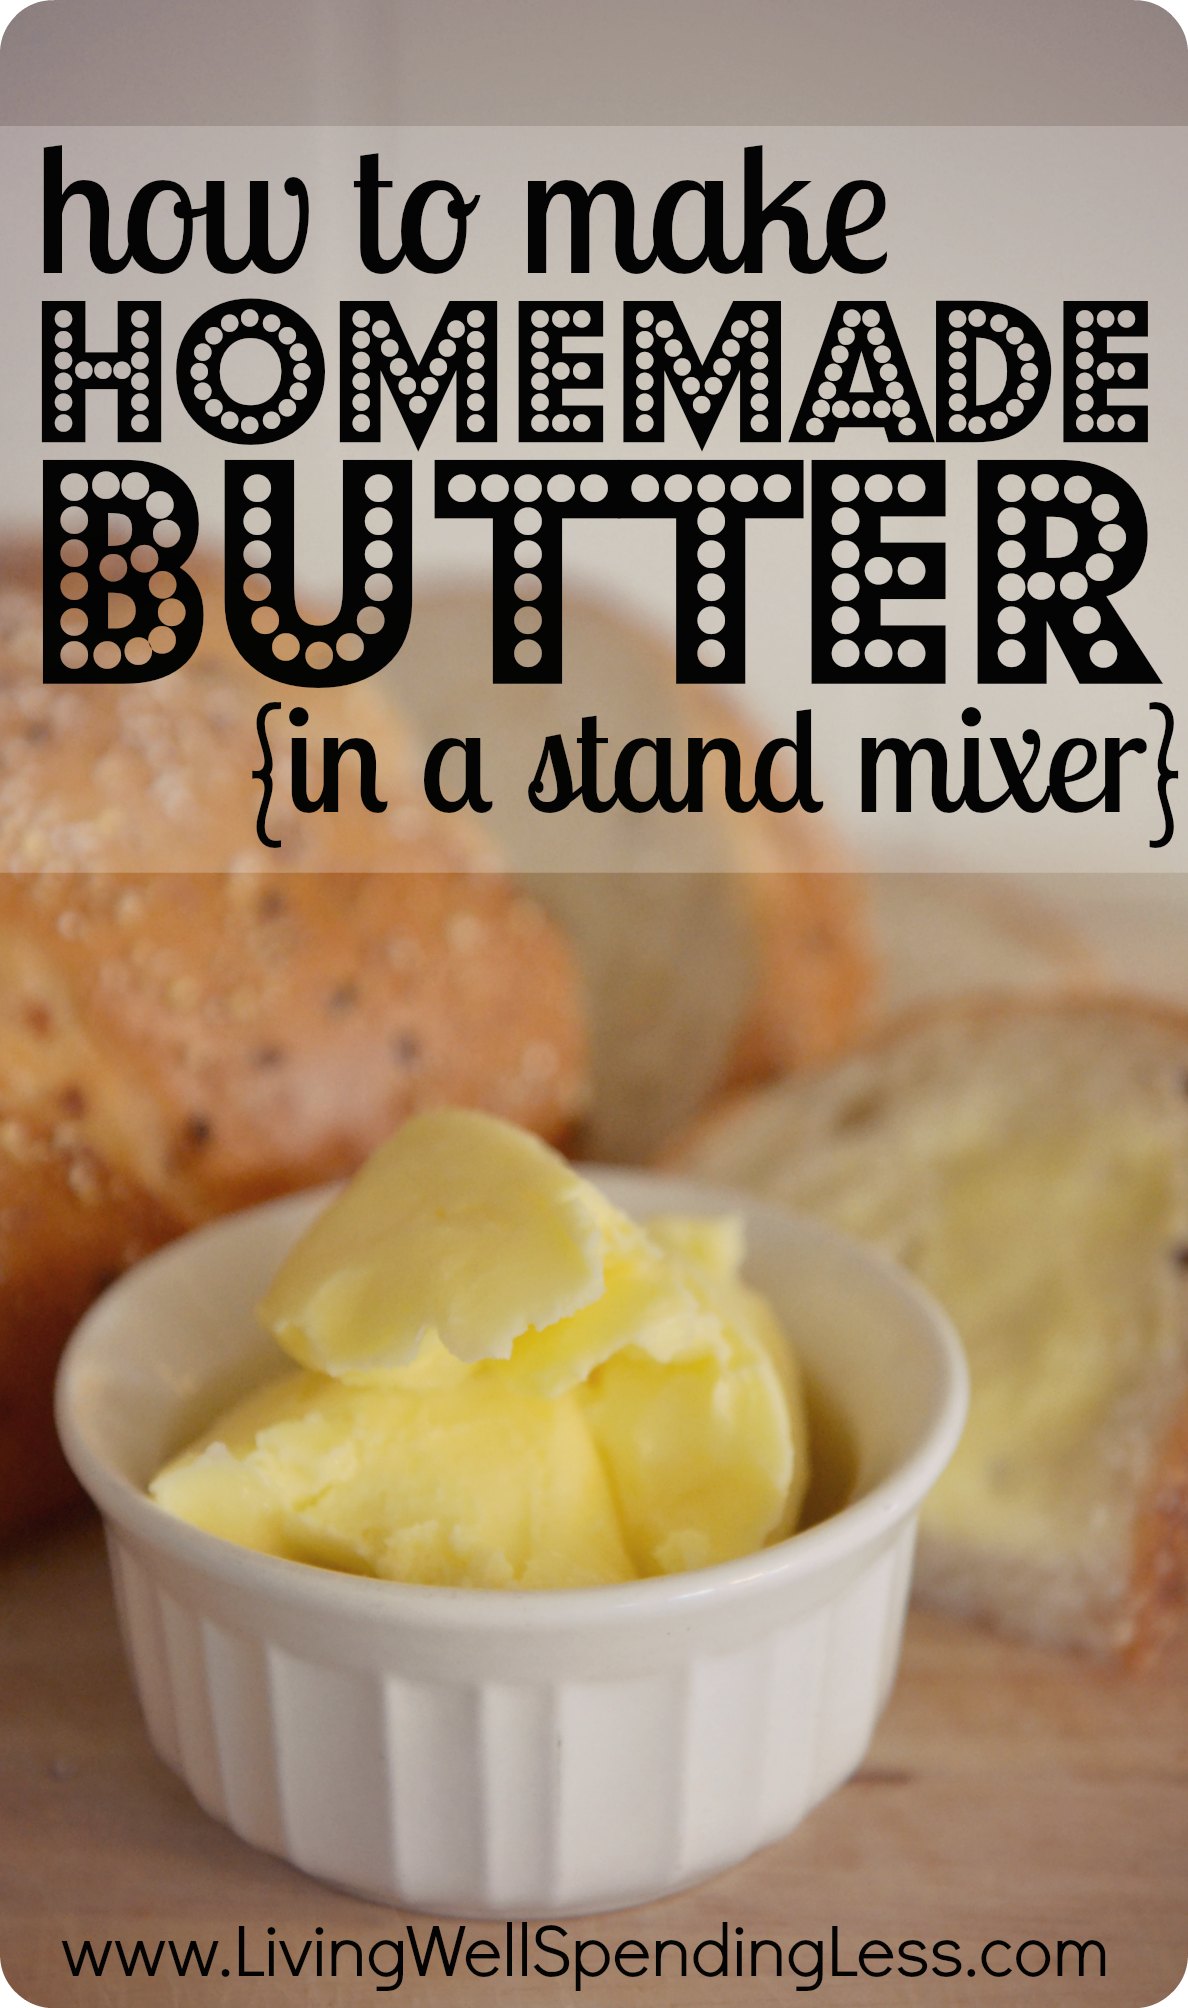 in a to how mixer. in a  shaking homemade believe butter how I stand jar easy can't make make to   How butter